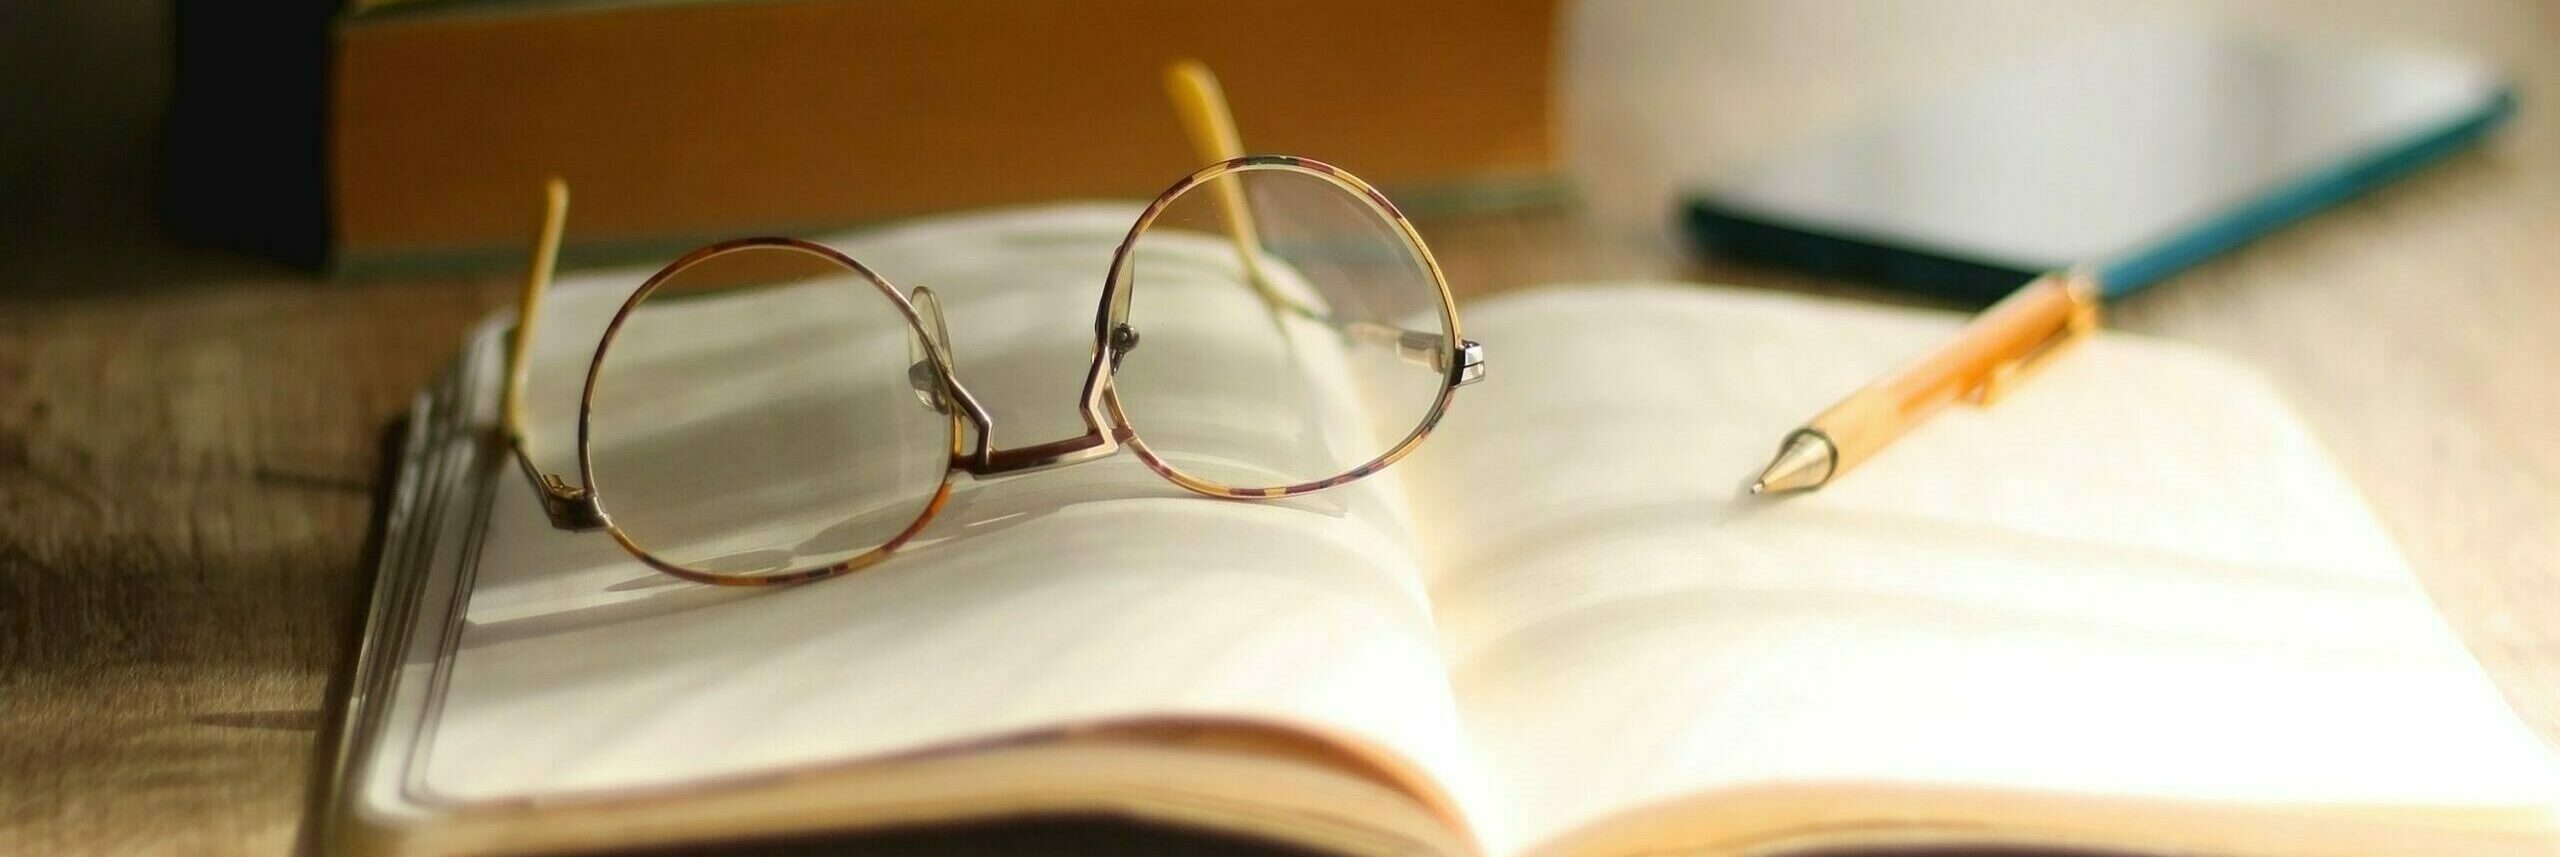 open book with glasses and pen